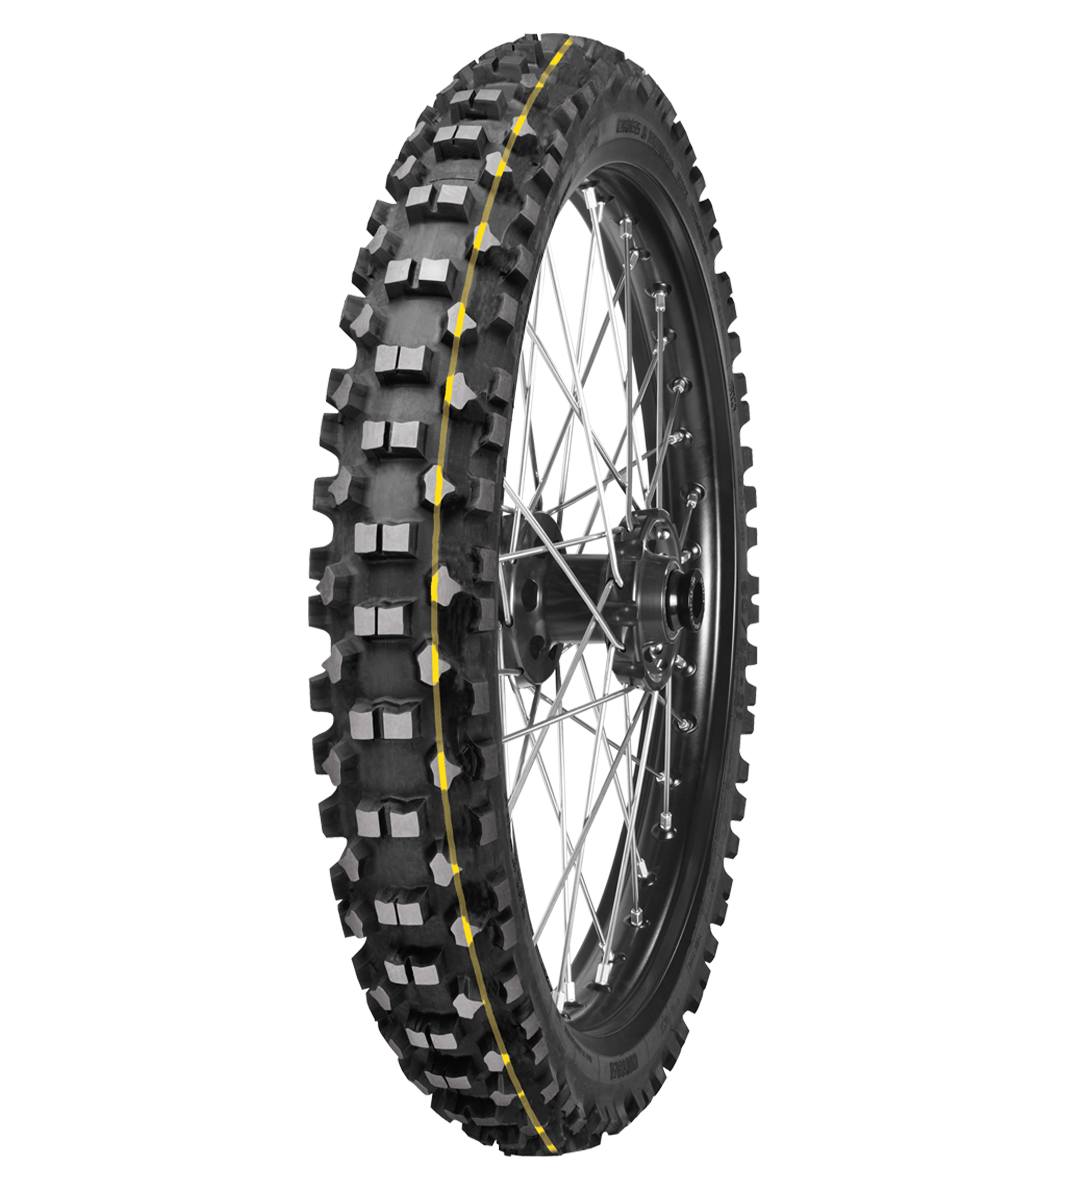 Mitas C-21 STONE KING 90/90-14 Enduro Competition Off-Road SUPER 40M Yellow Tube Front Tire, 226072, 90/90-14, C-21 Stone King, Enduro, Enduro Competition, Front, Off-Road, Tires - Imported and distributed in North &amp; South America by Lindeco Genuine Powersports - Premier Powersports Equipment and Accessories for Motorcycle Enthusiasts, Professional Riders and Dealers.